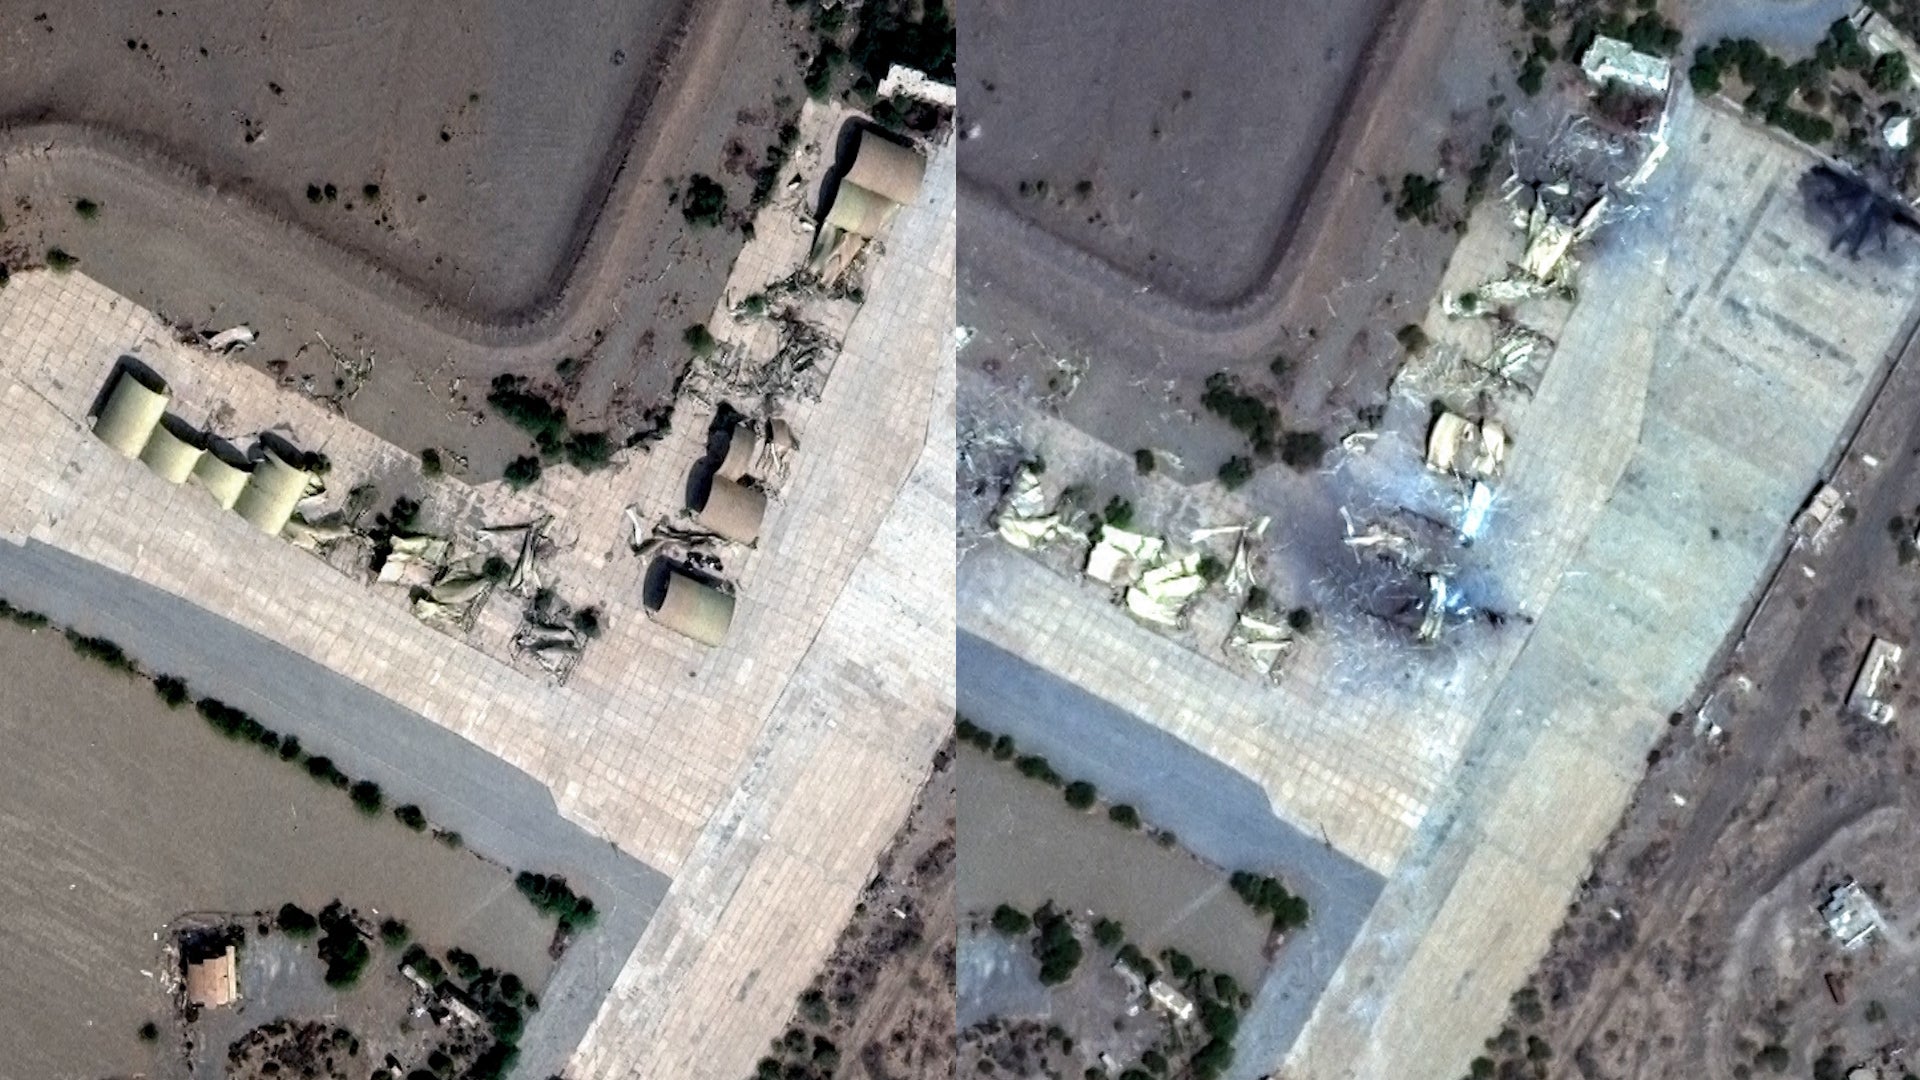 Houthi sites before and after US-led airstrikes captured by satellite